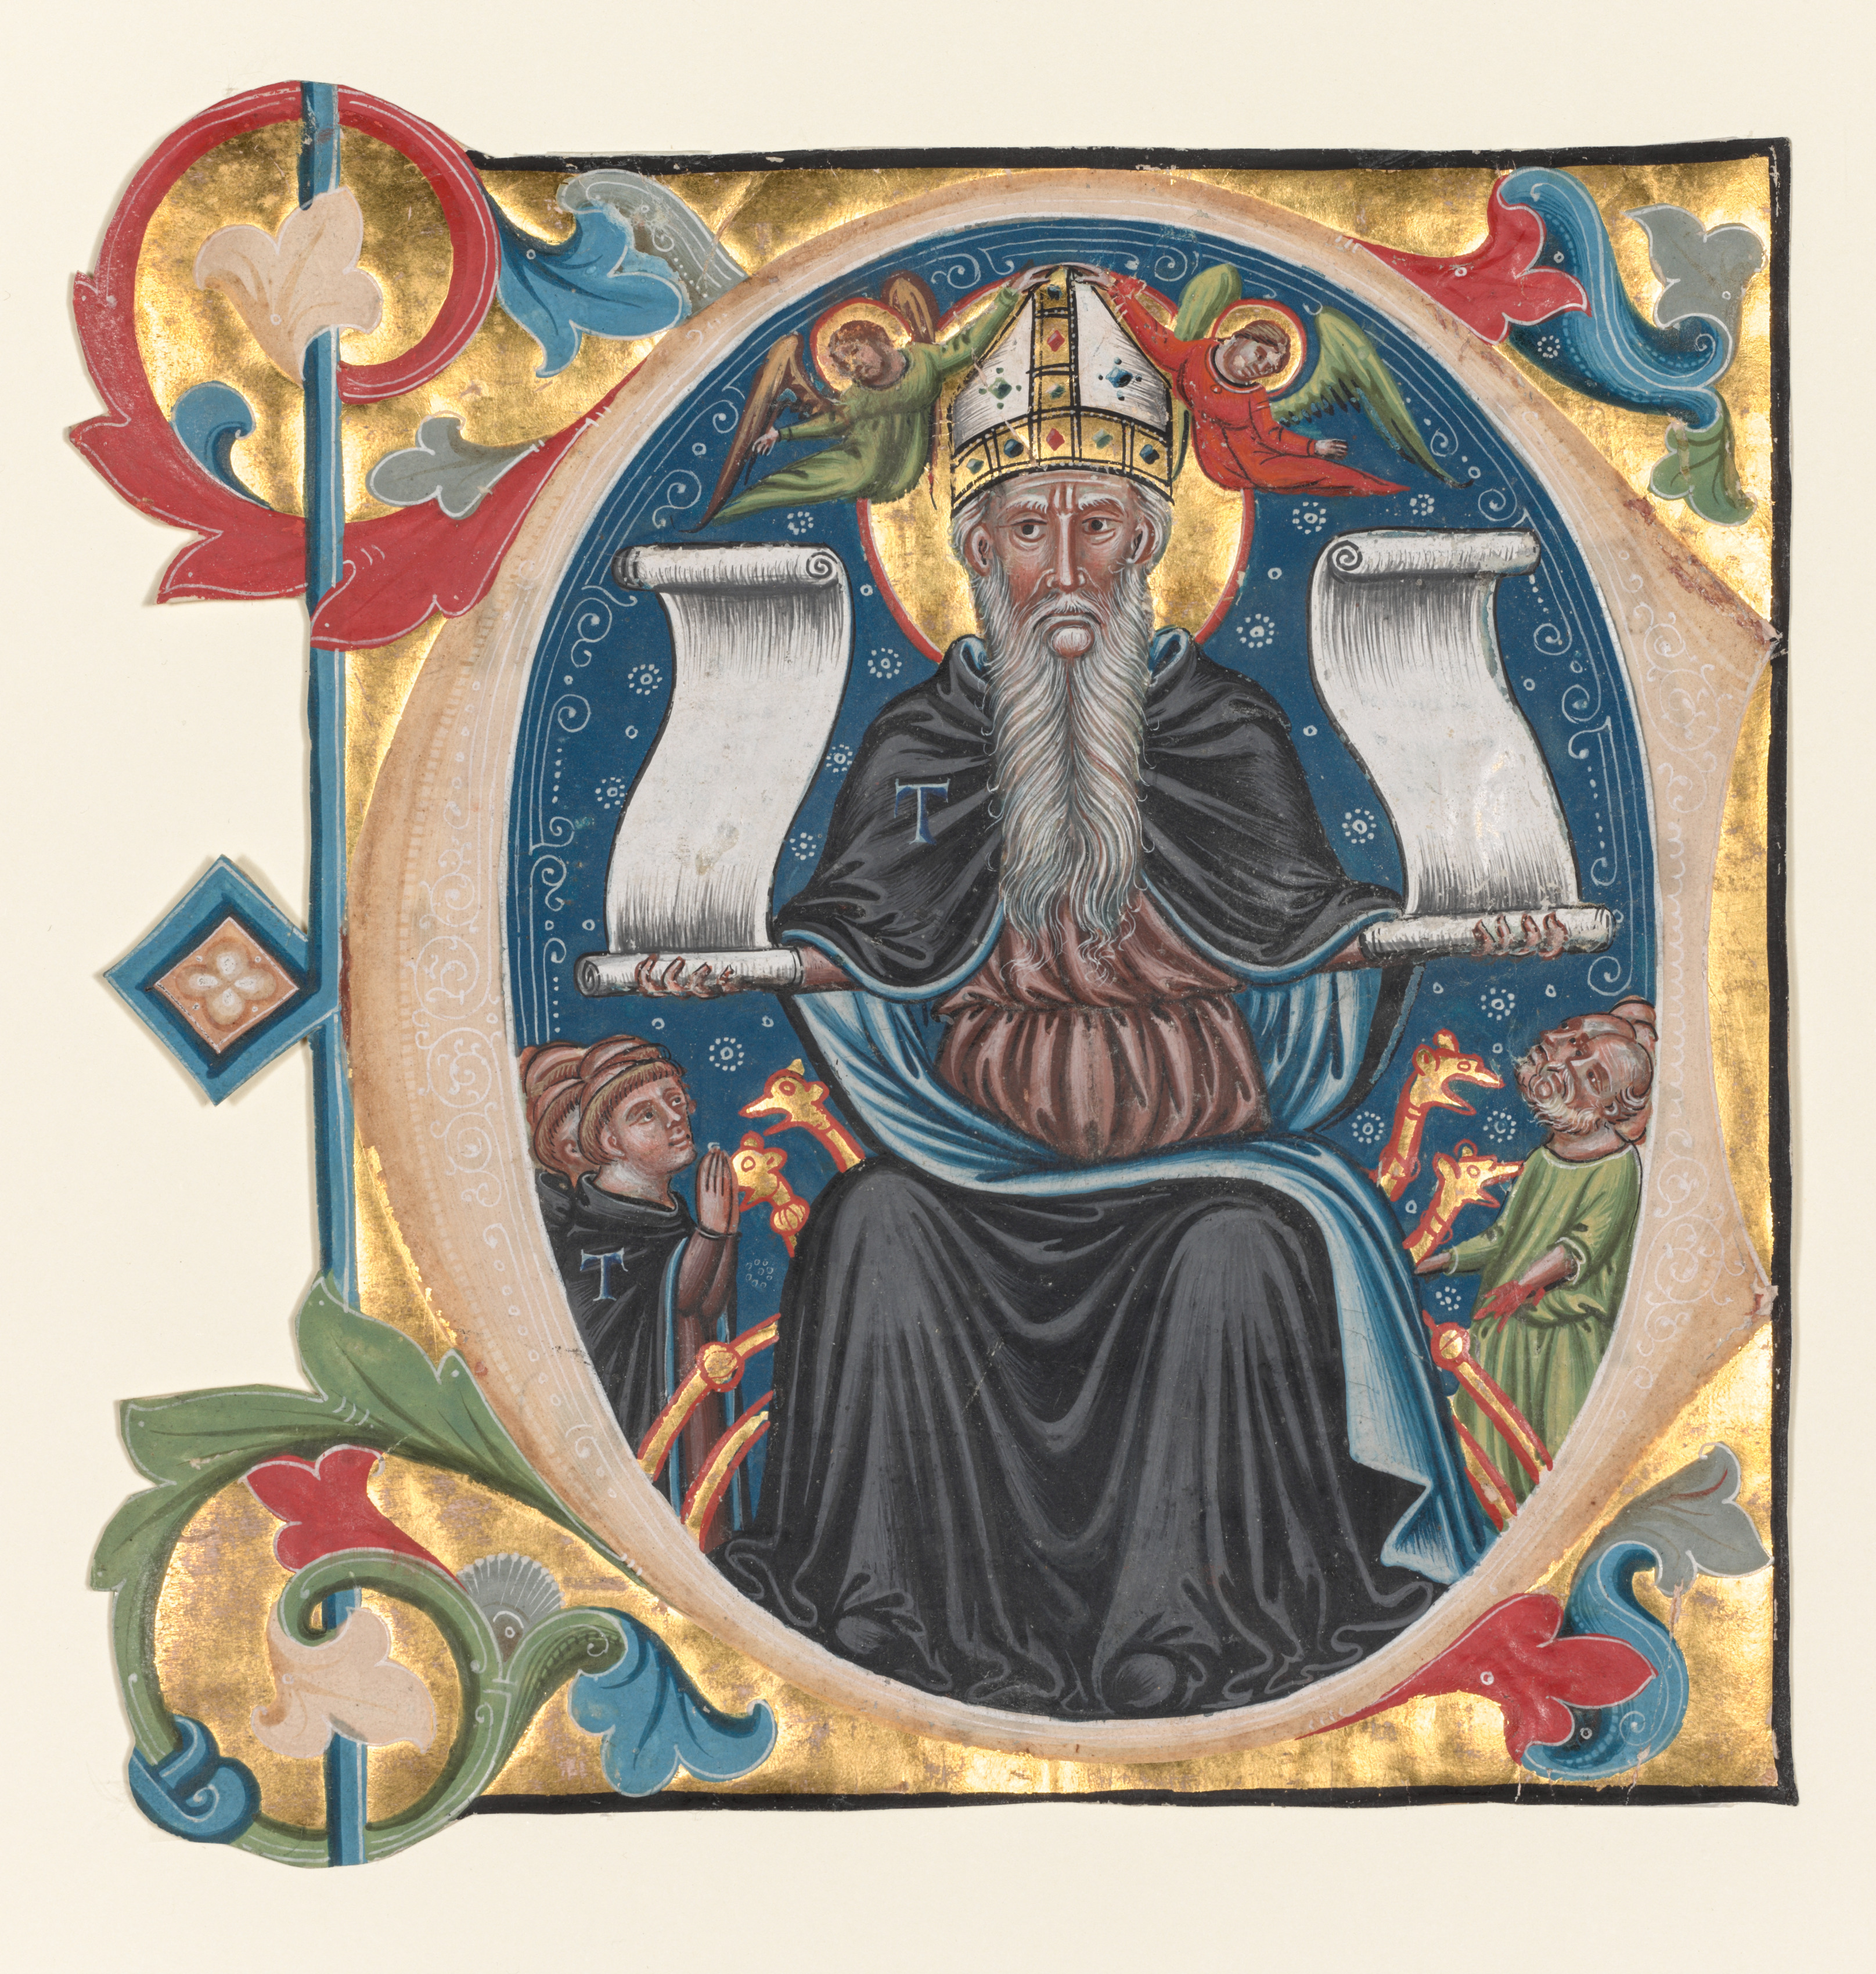 Initial C Excised from a Choral Book: St. Anthony with Antonite Friars